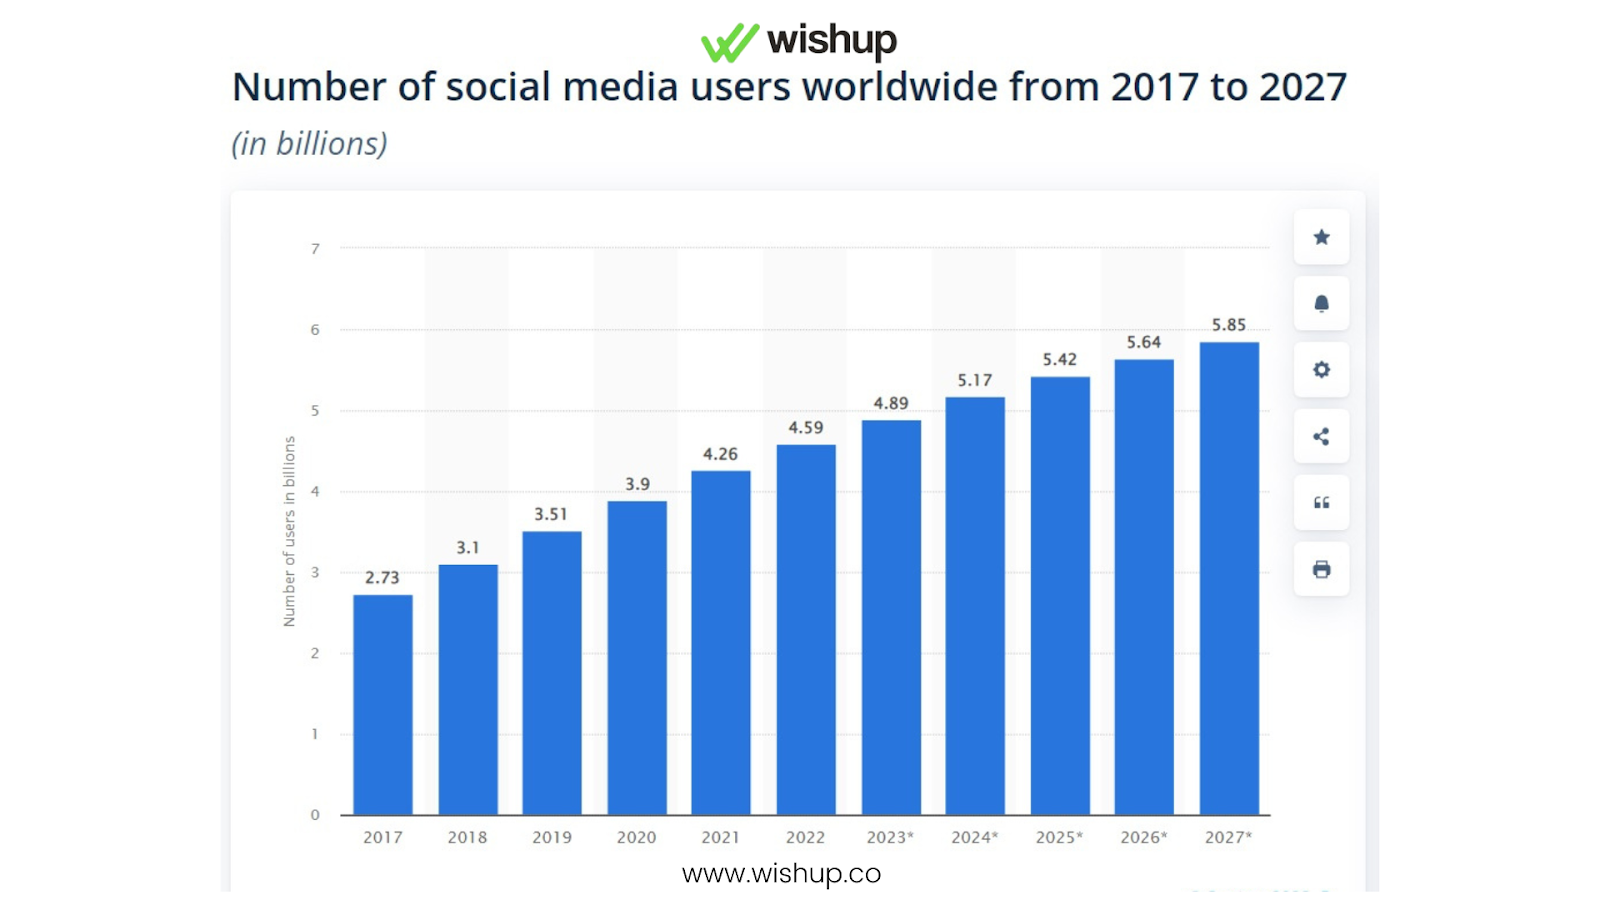 a graph showing the number of global social media users in billions from 2017-2027